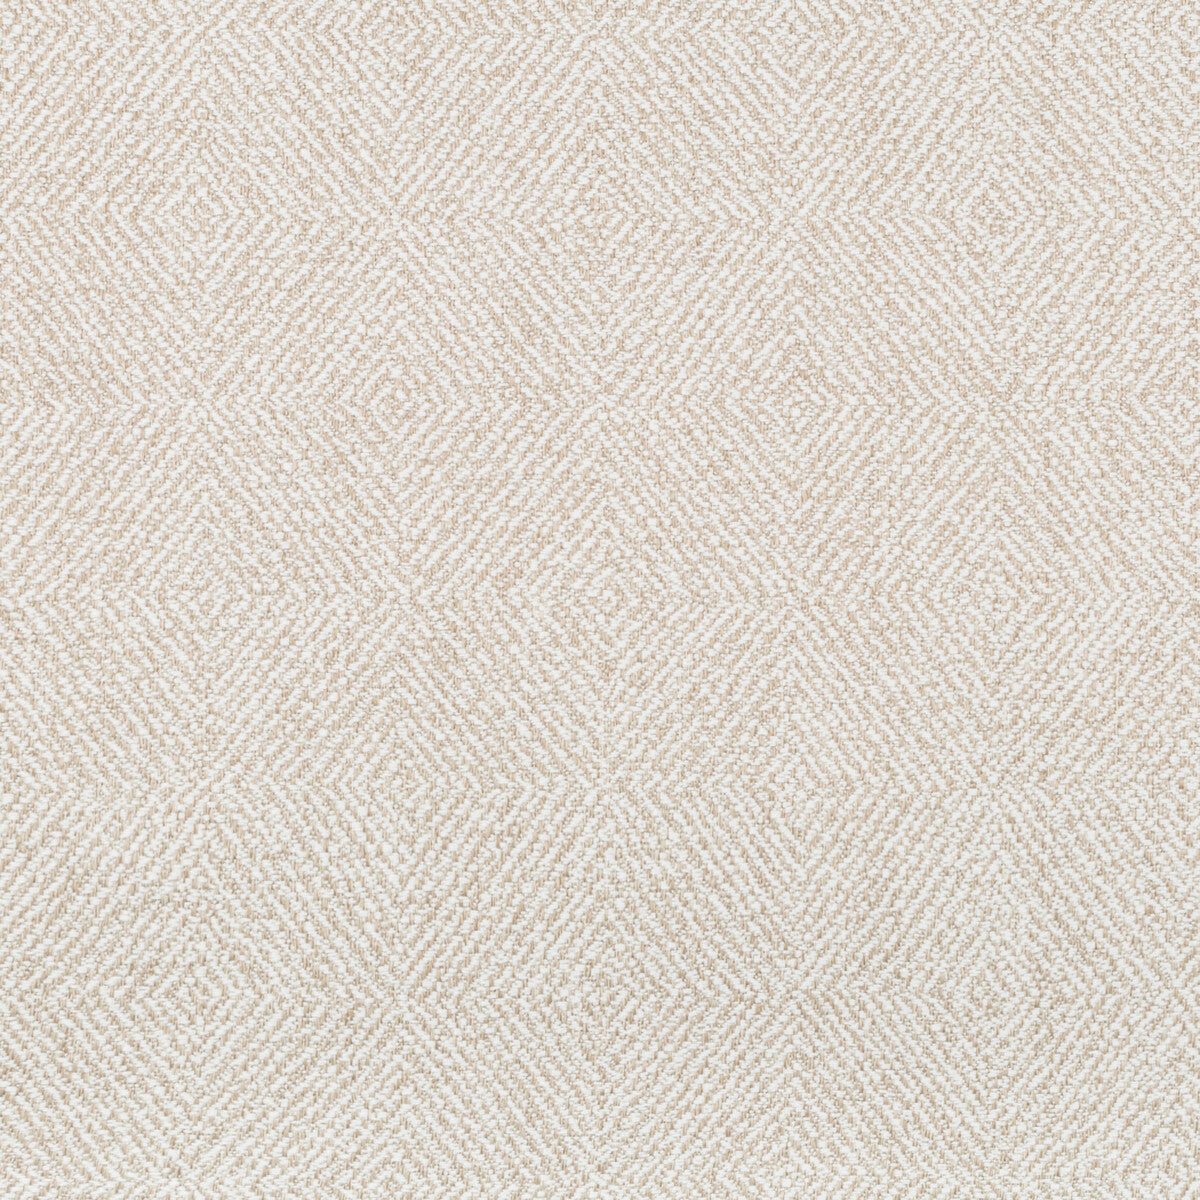 Egress fabric in dune color - pattern 35747.16.0 - by Kravet Couture in the Vista collection